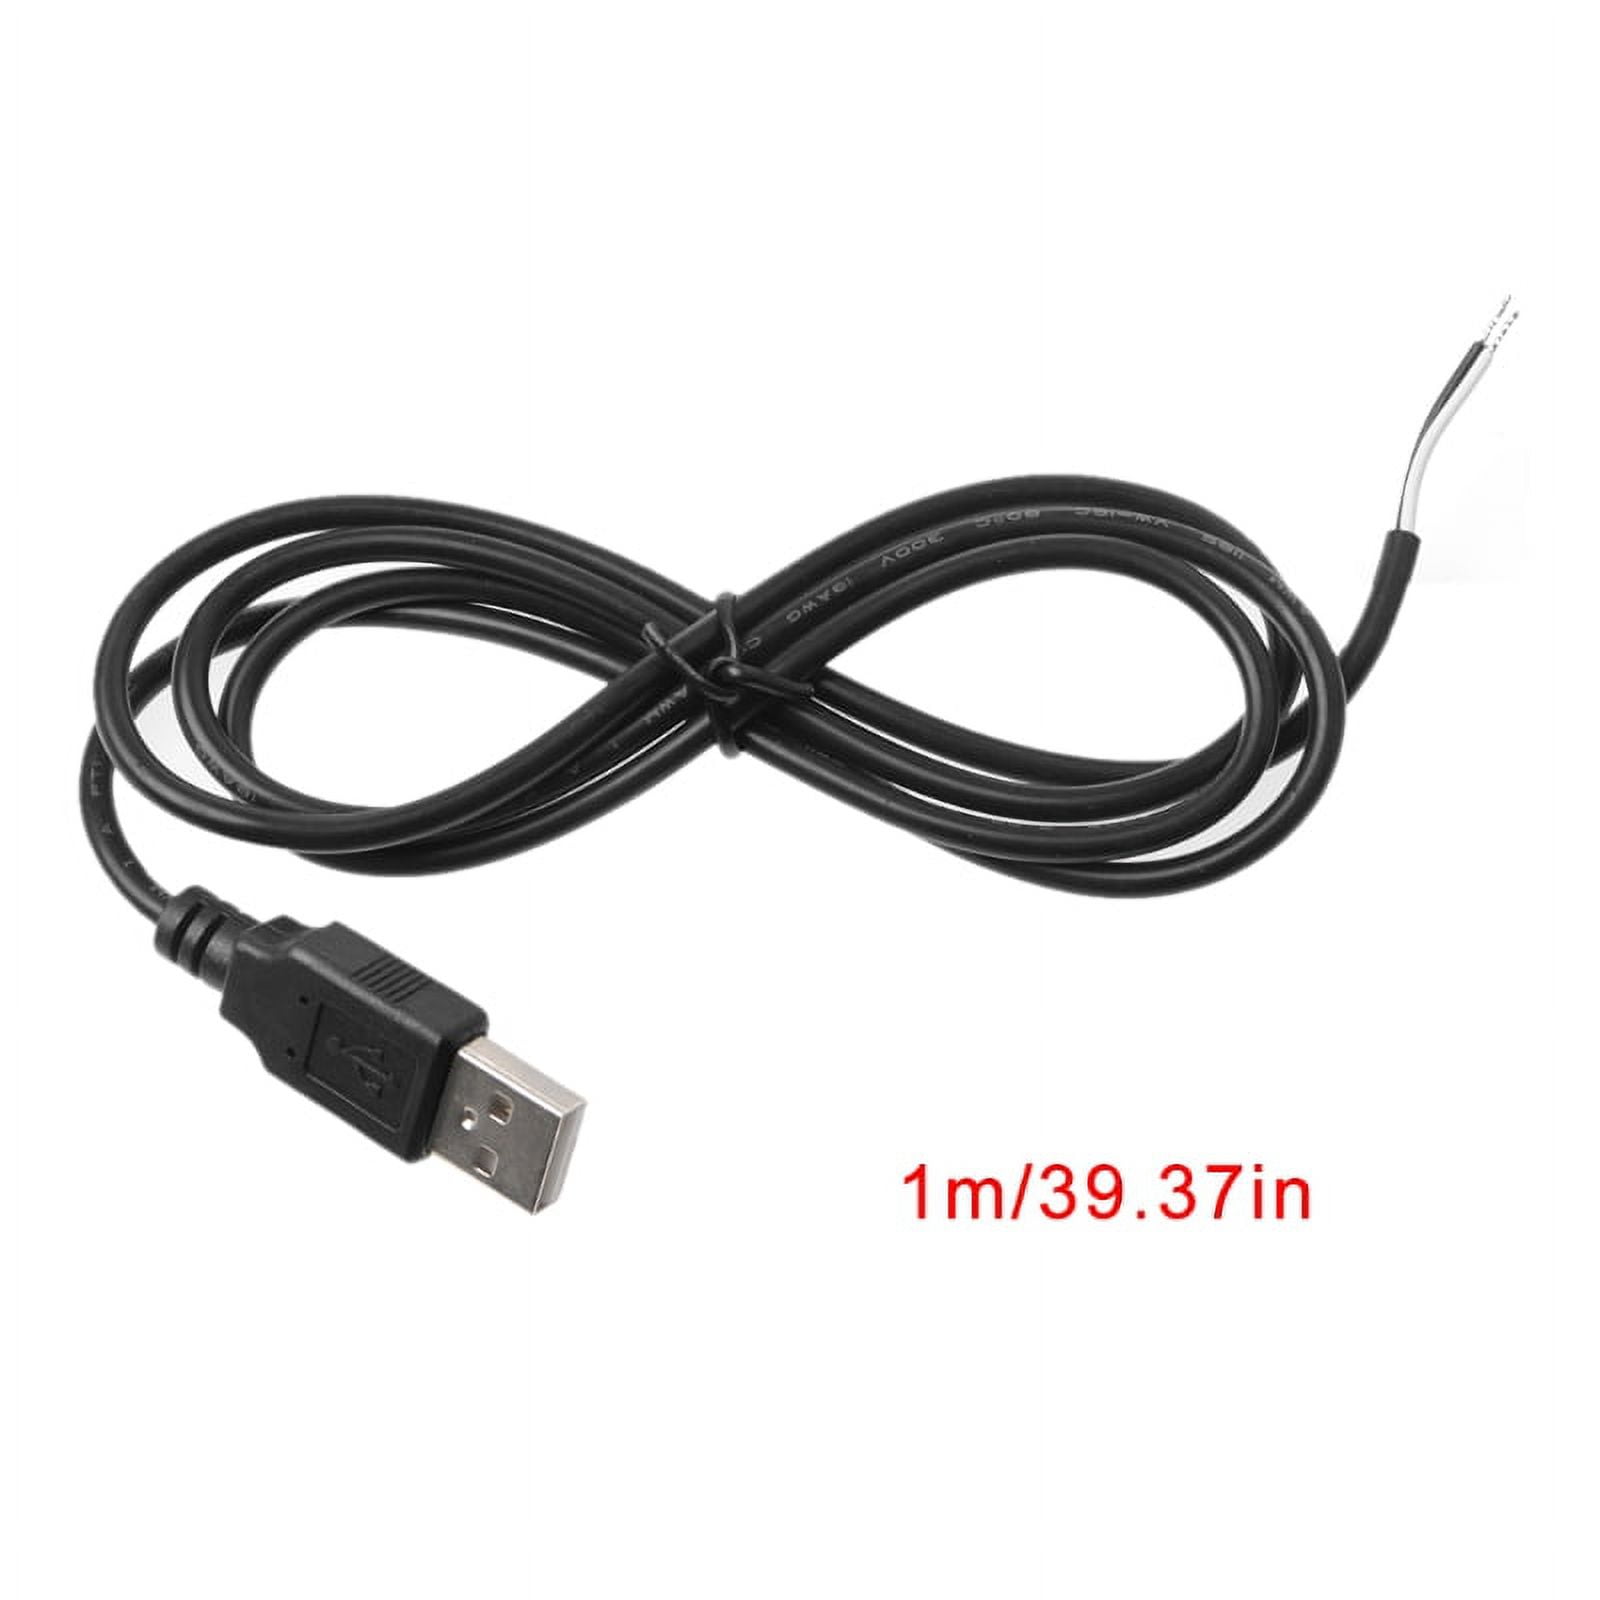 2m USB to 5V DC Power Cable - Type N - USB Adapters (USB 2.0), Cables